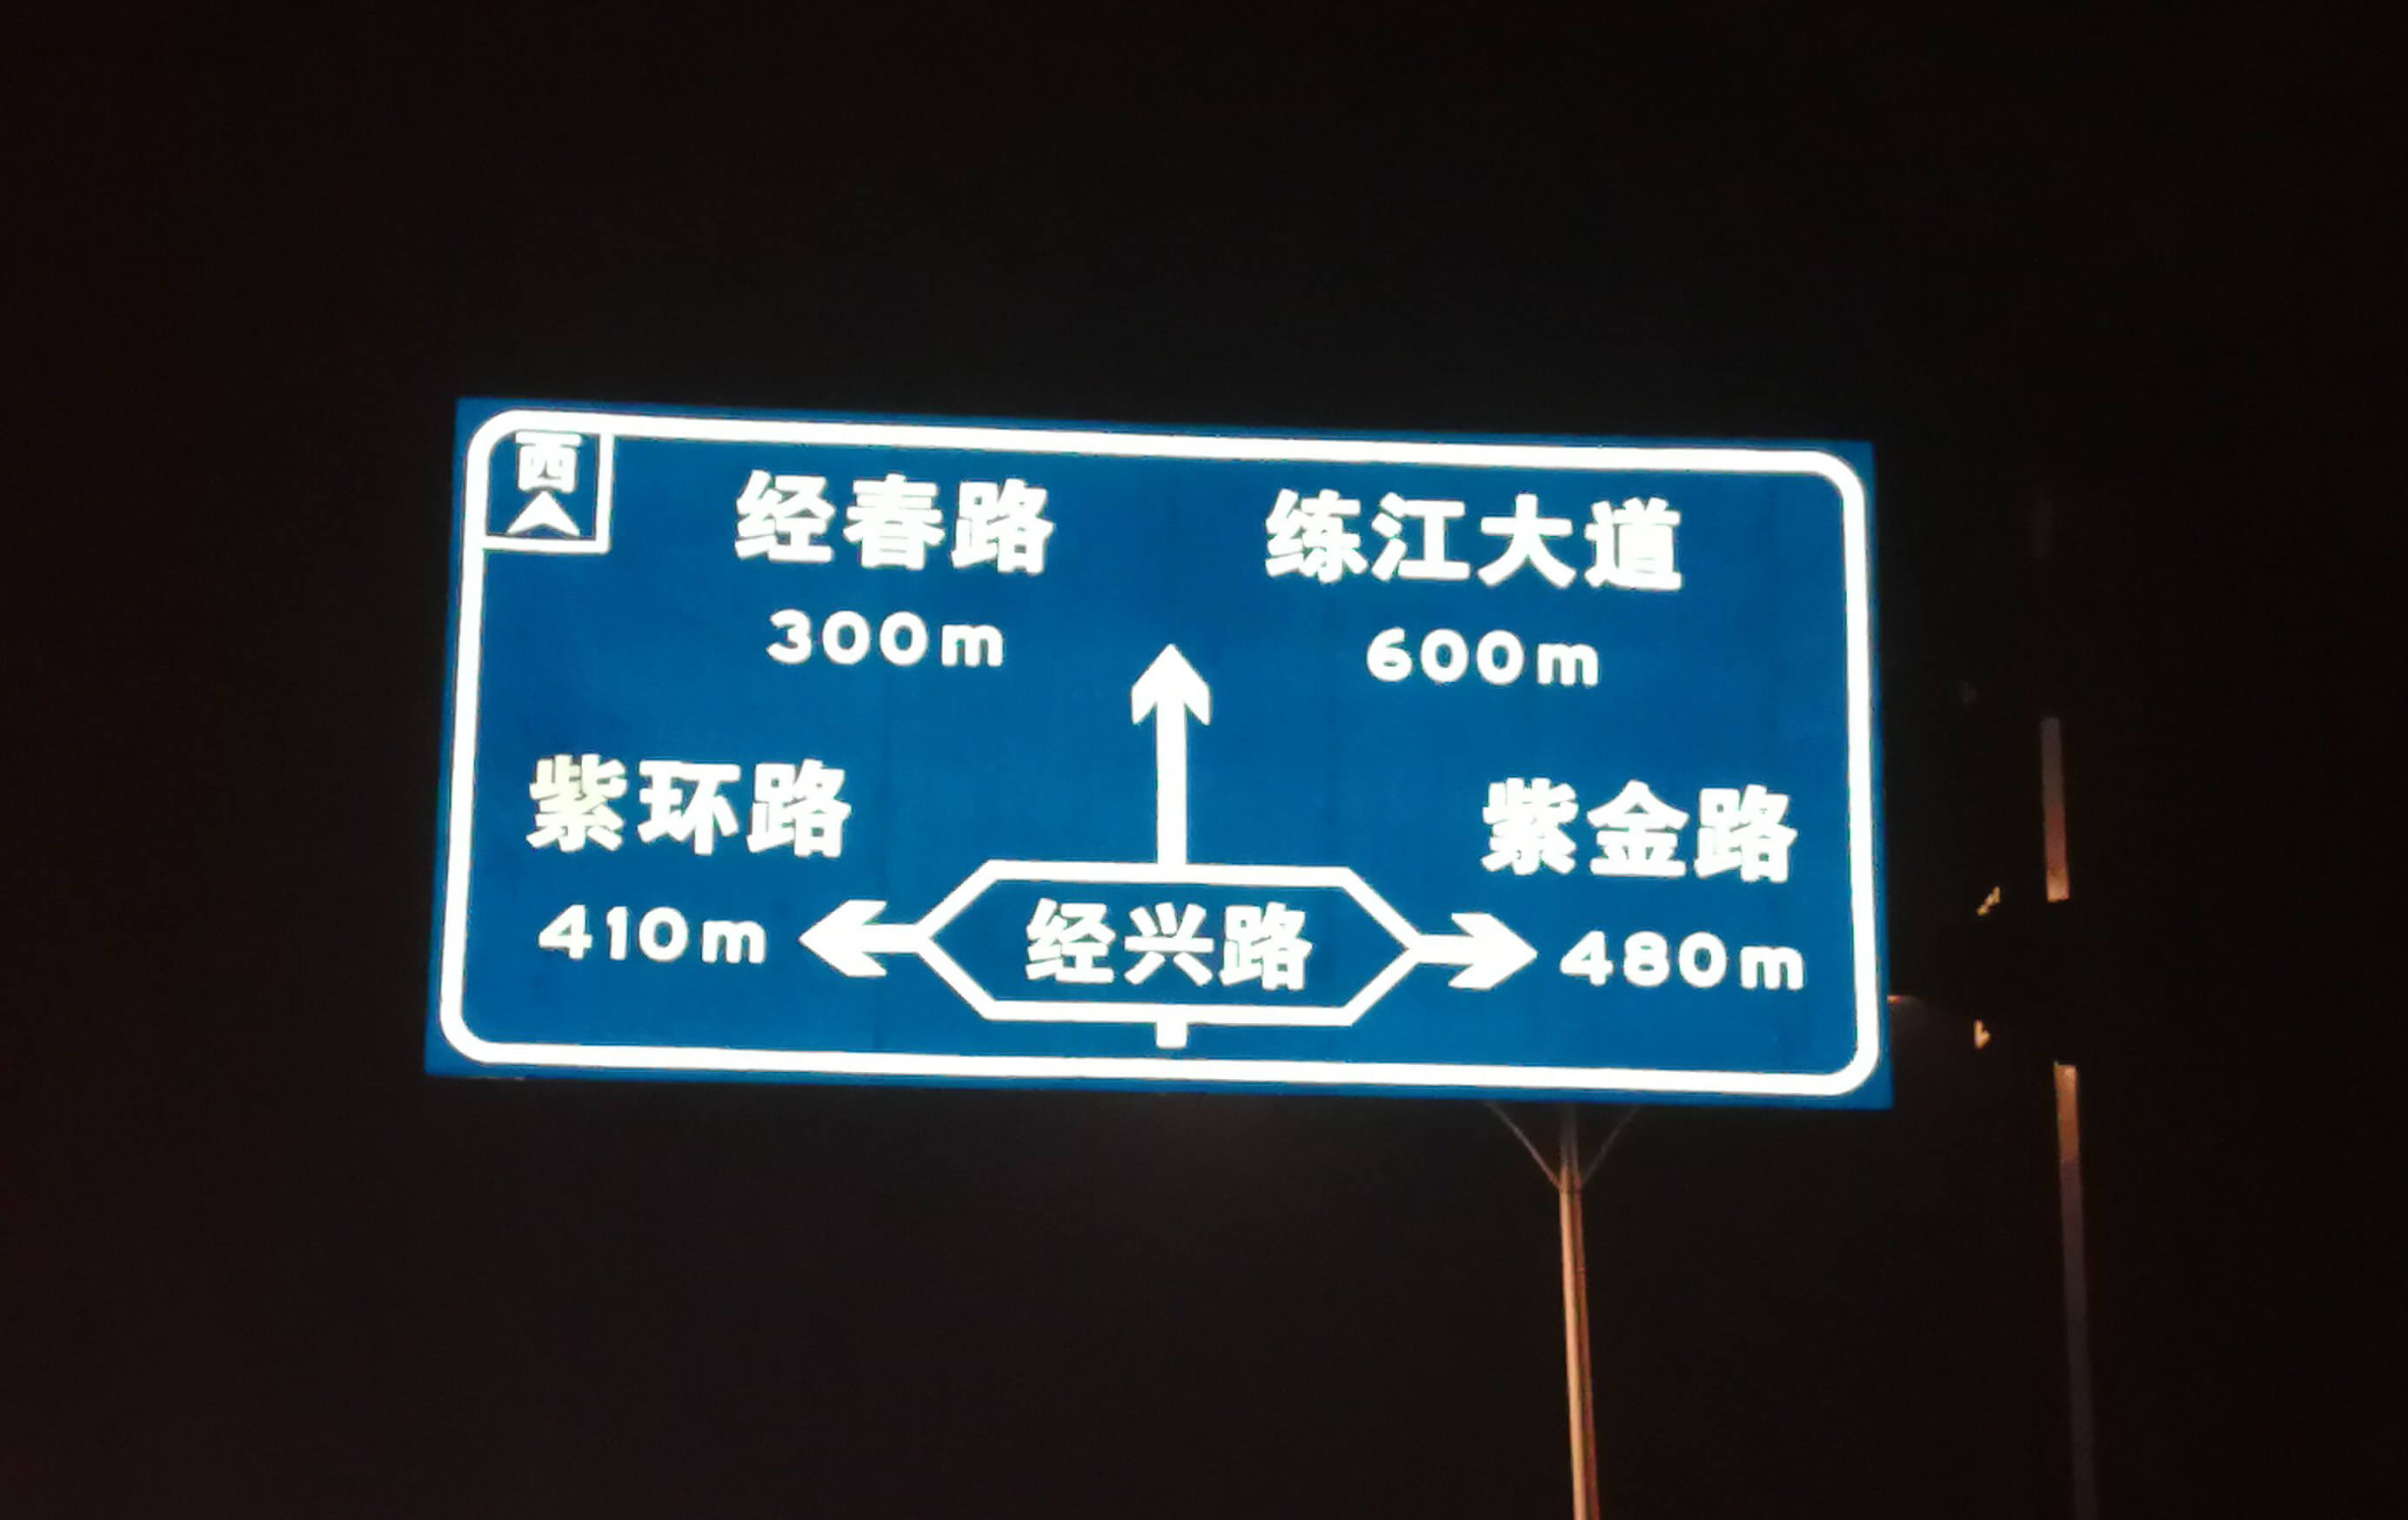 XW's reflective sheeting used on street sign